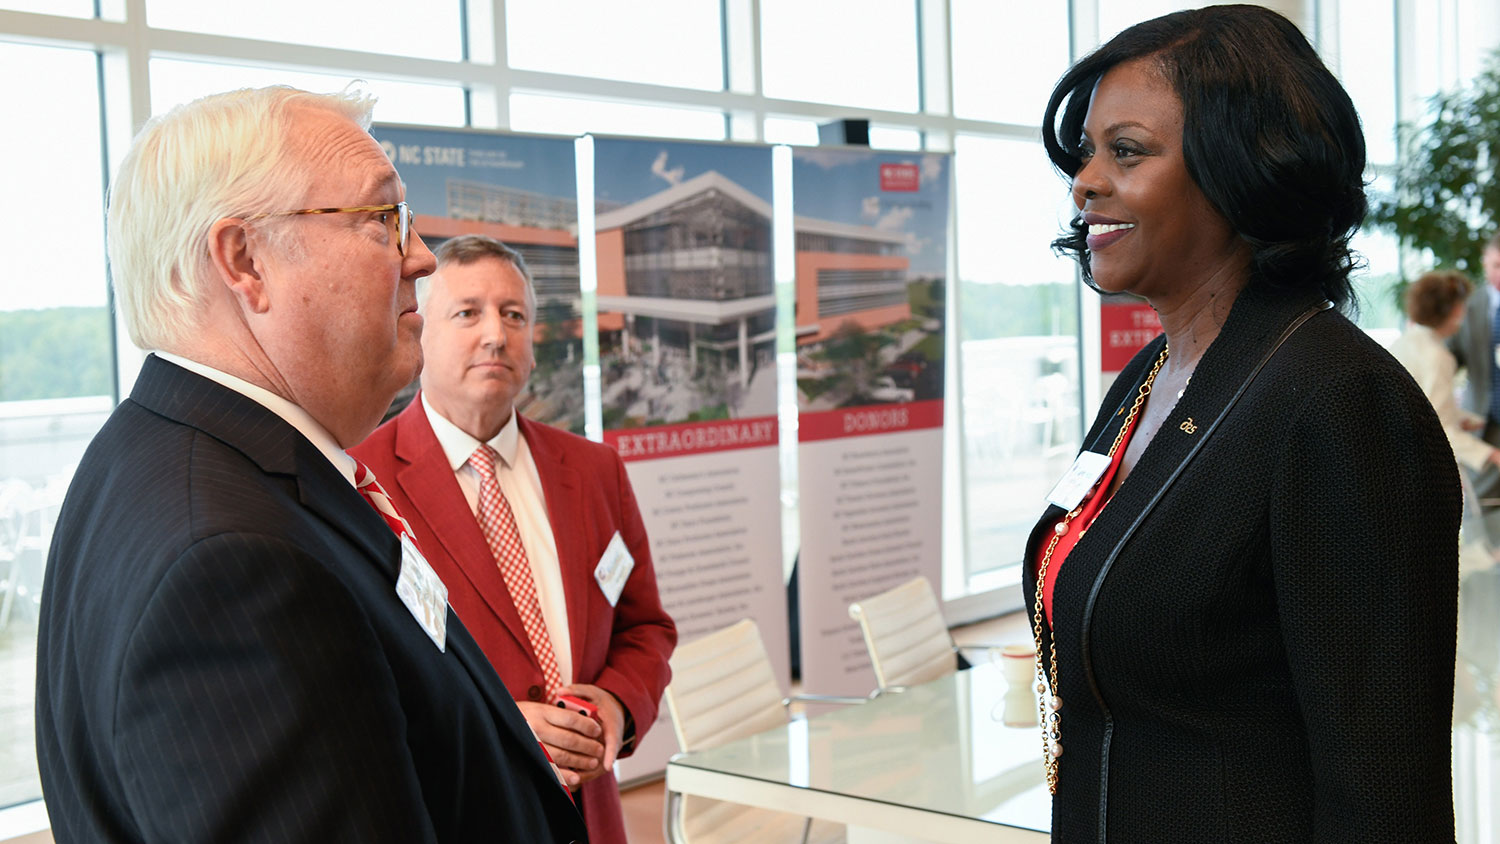 Chancellor Randy Woodson, Dean Richard Linton and USDA ARS Administrator Chavonda Jacobs-Young talking near a Plant Sciences Building display